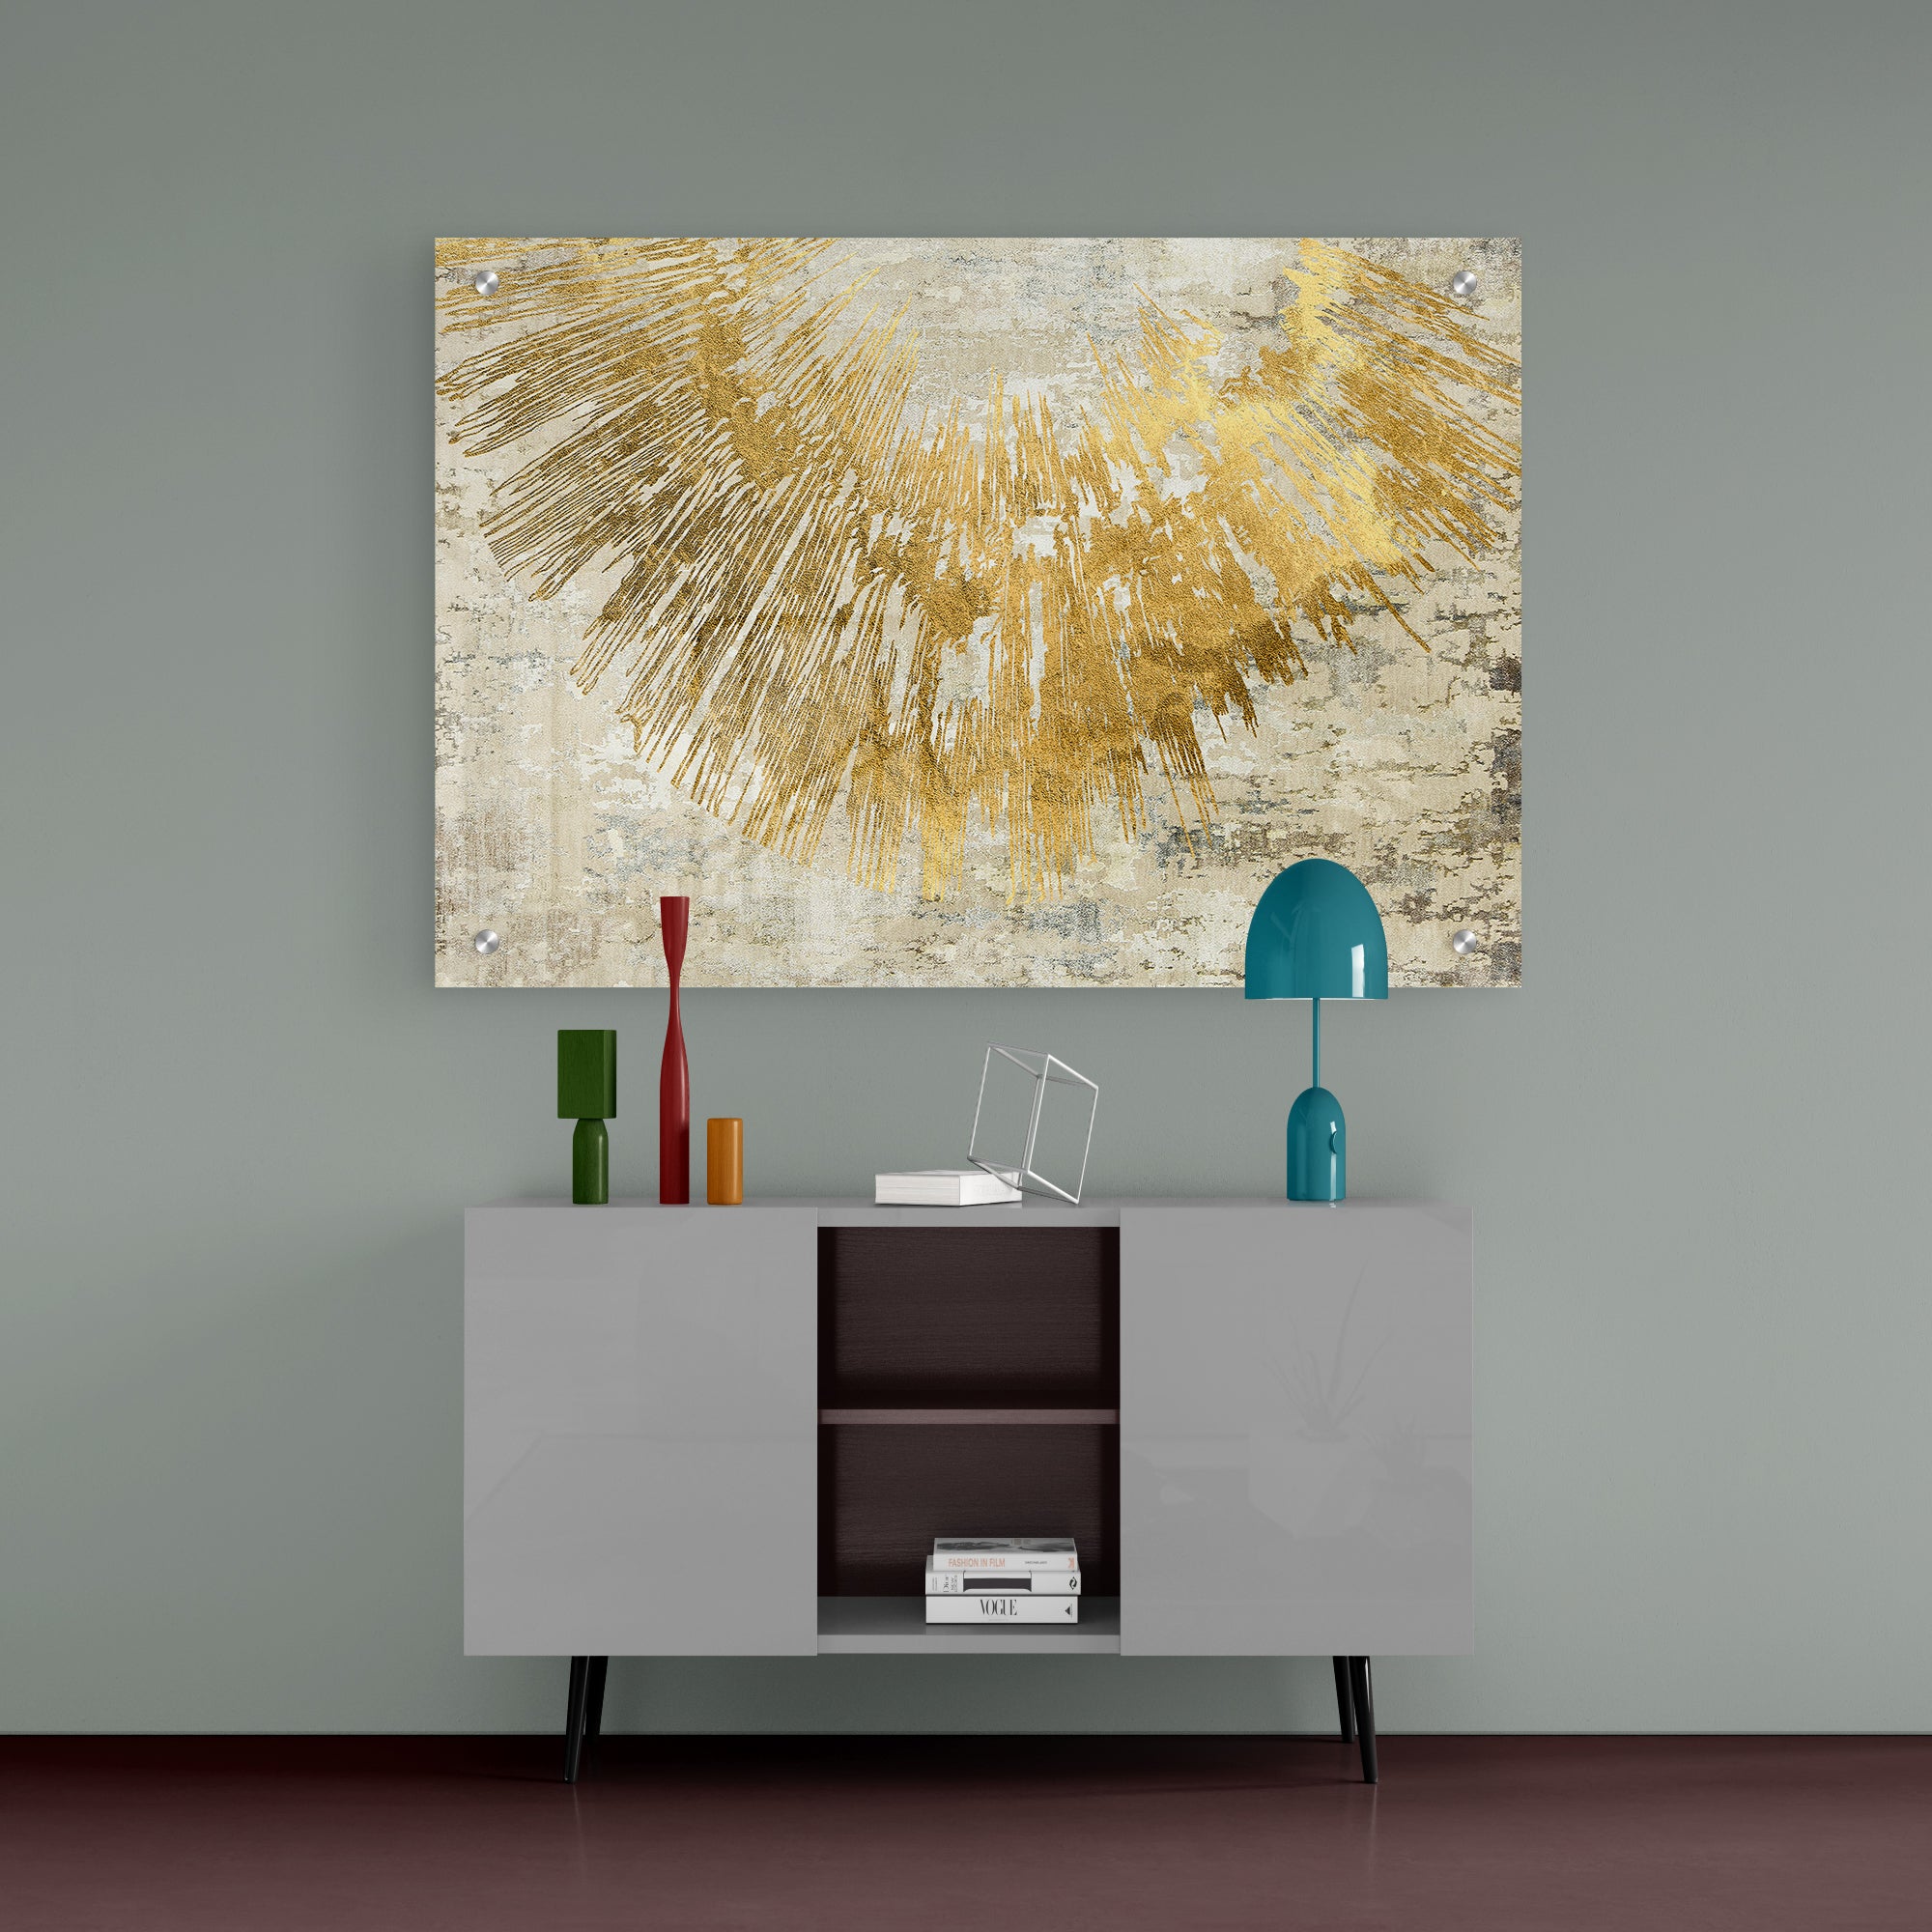 Abstract Golden And Beige Backgound Modern Art Acrylic Wall Painting